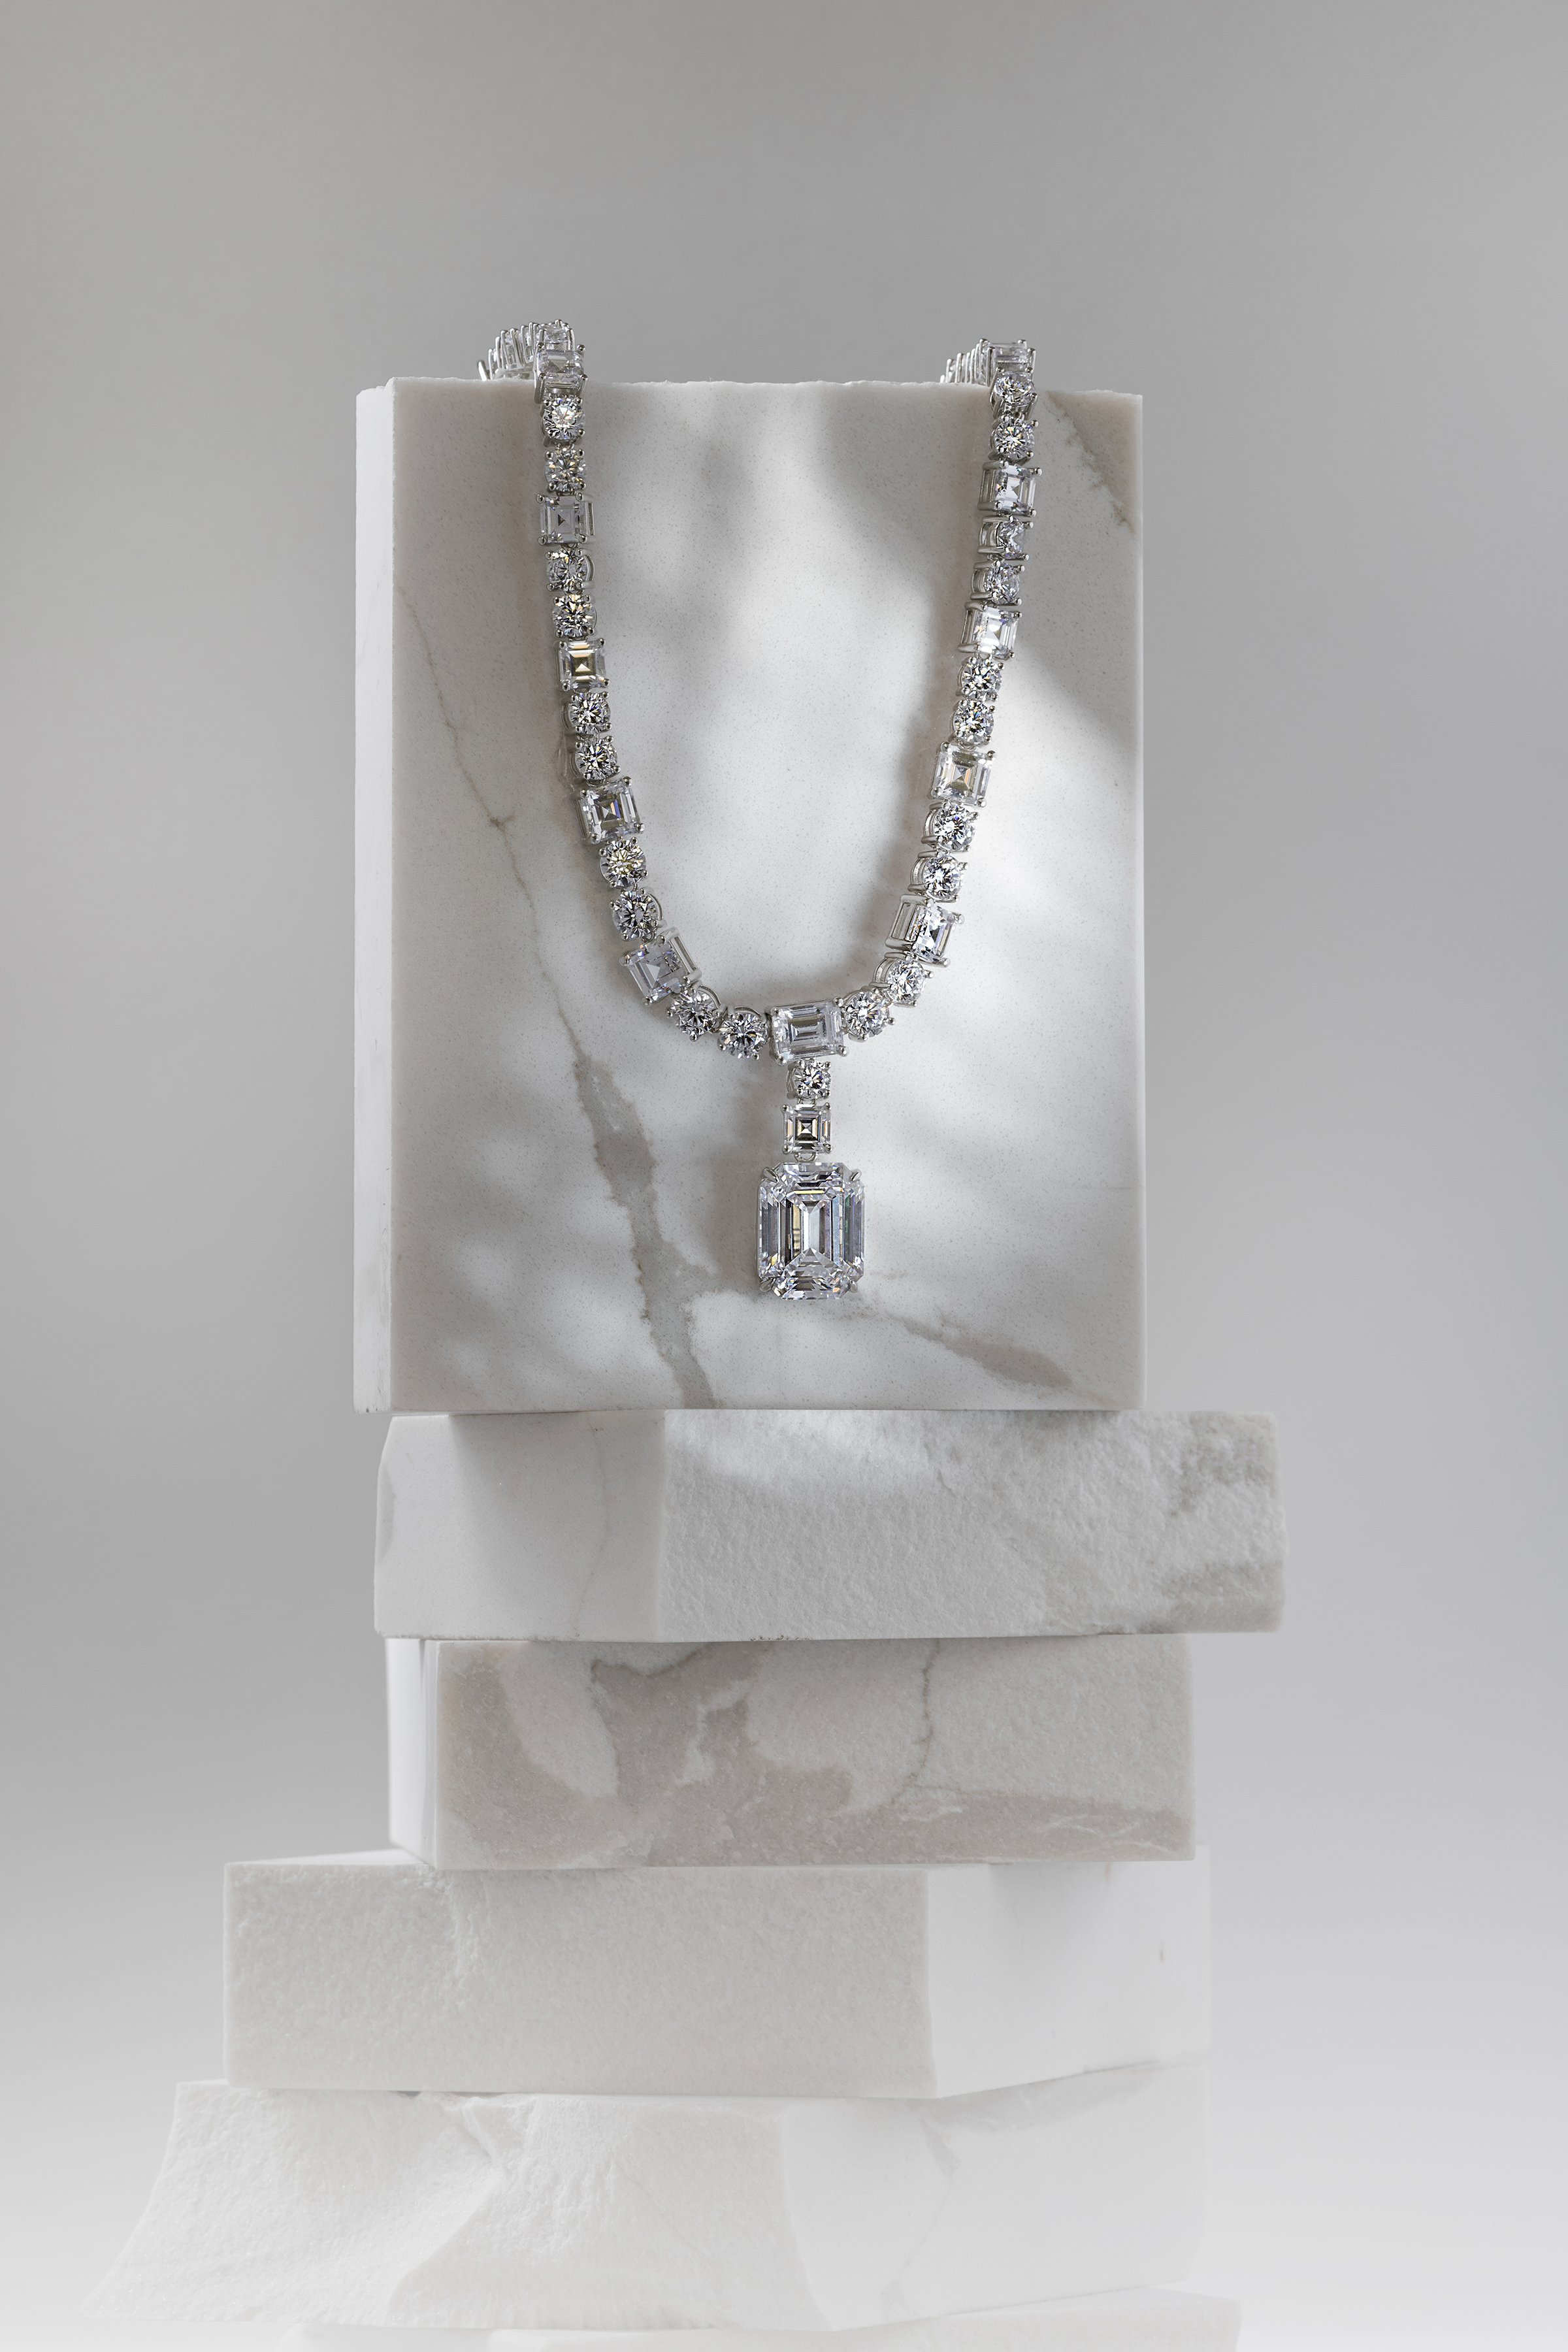 Diamond Necklace by photographer Andrew Werner .jpg